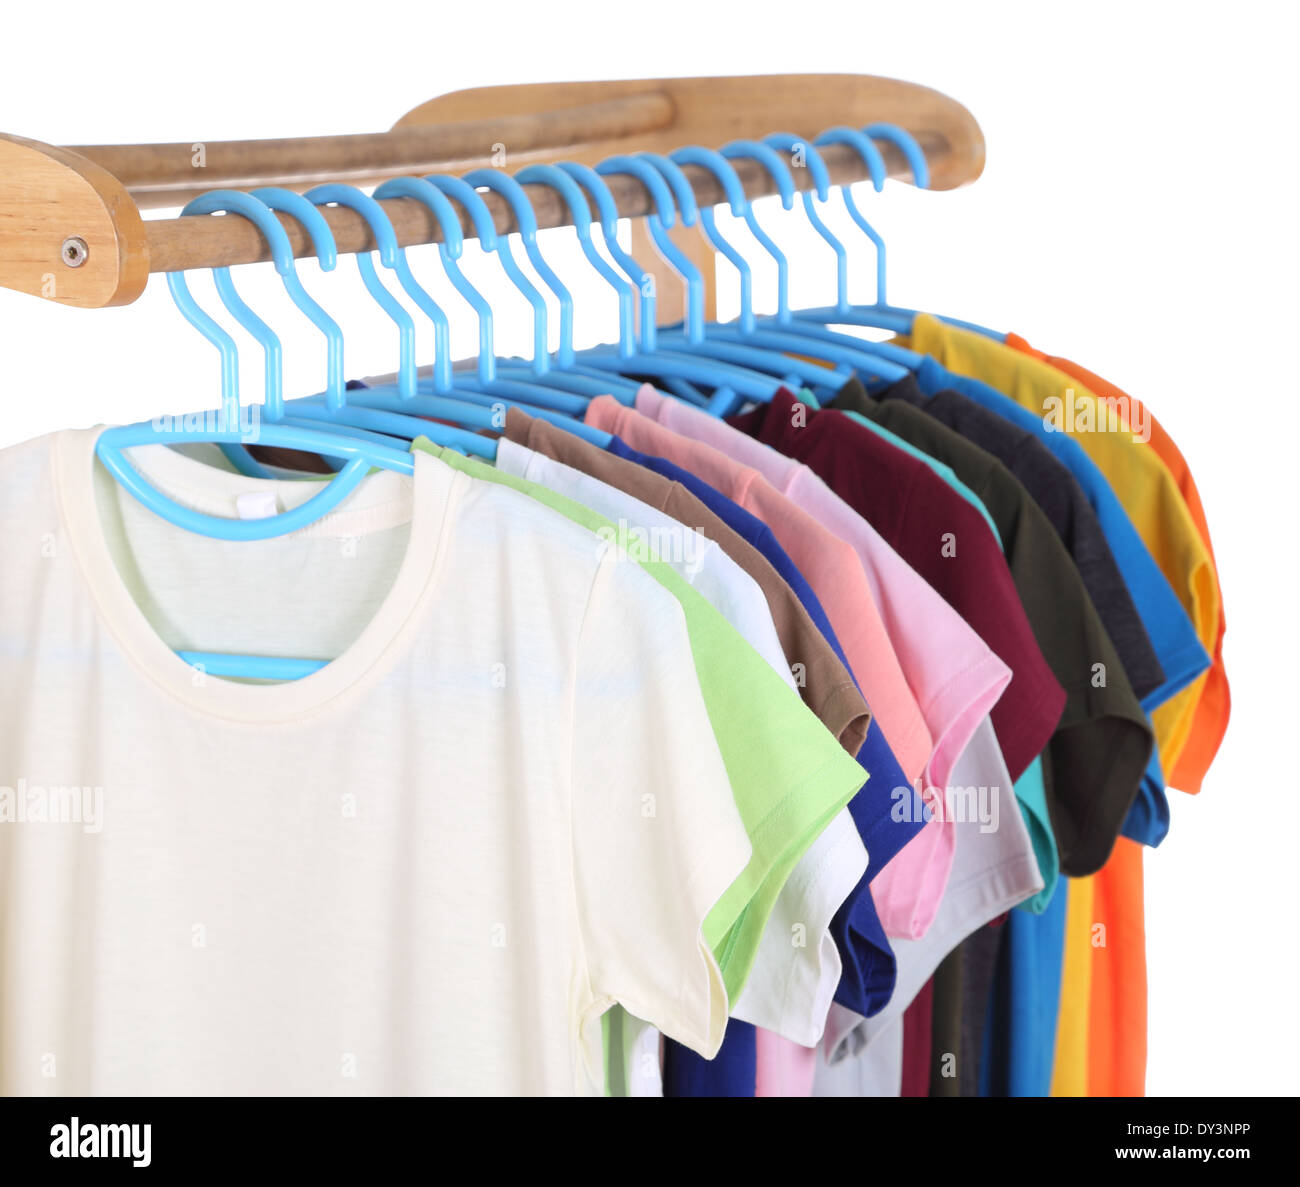 Row T Shirts Hanging On Hangers High Resolution Stock Photography and ...